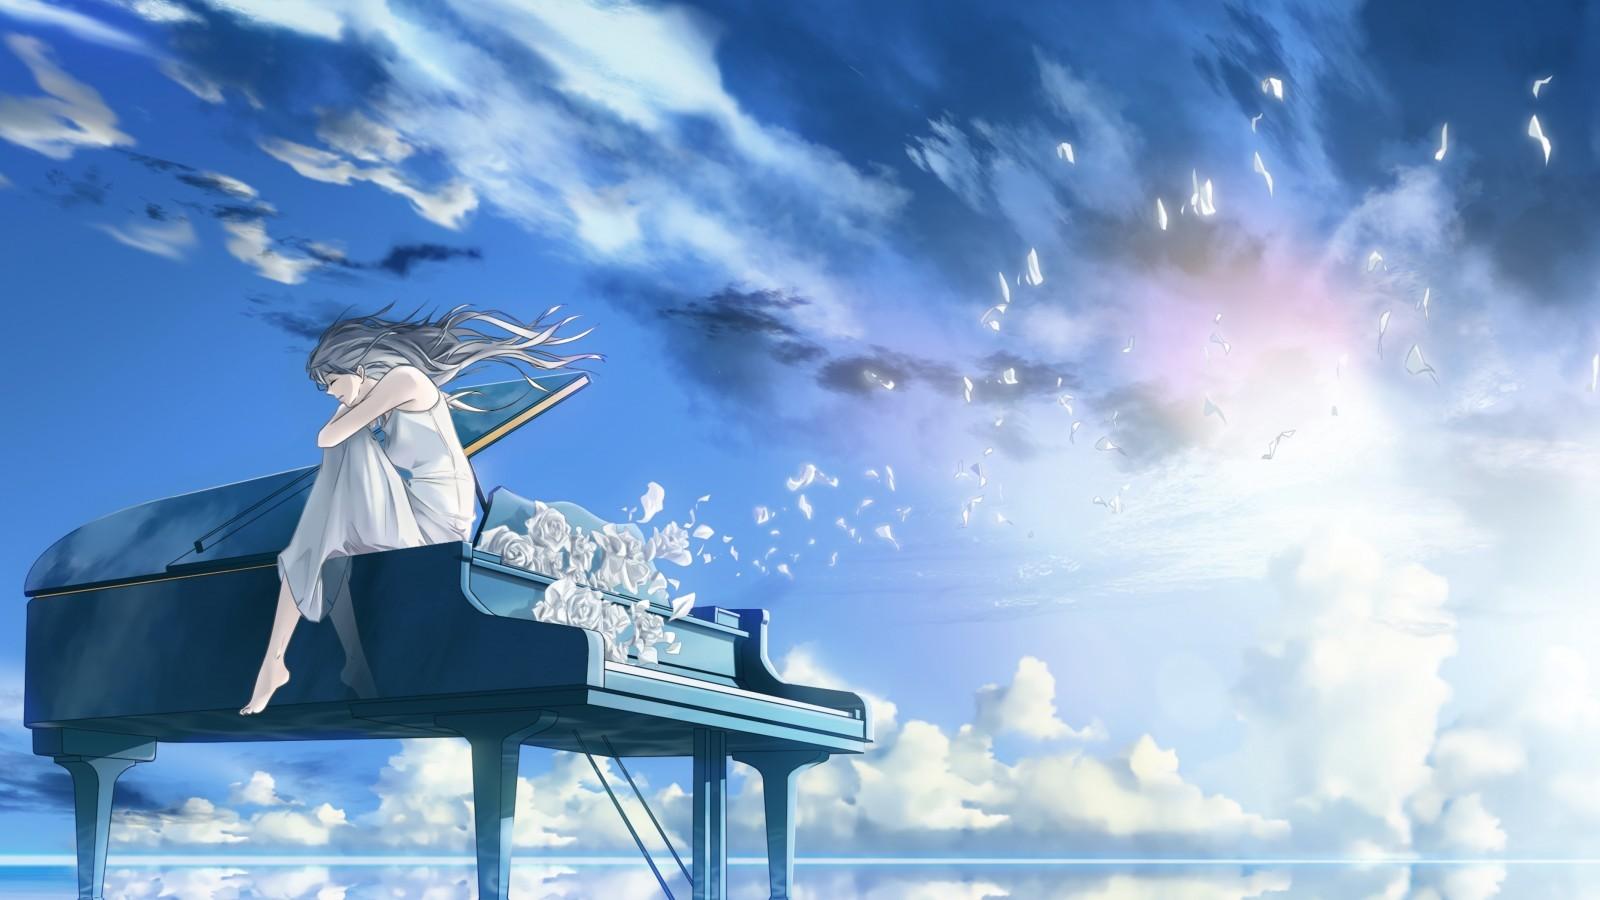 Download Music Anime Girl Playing Piano Wallpaper | Wallpapers.com